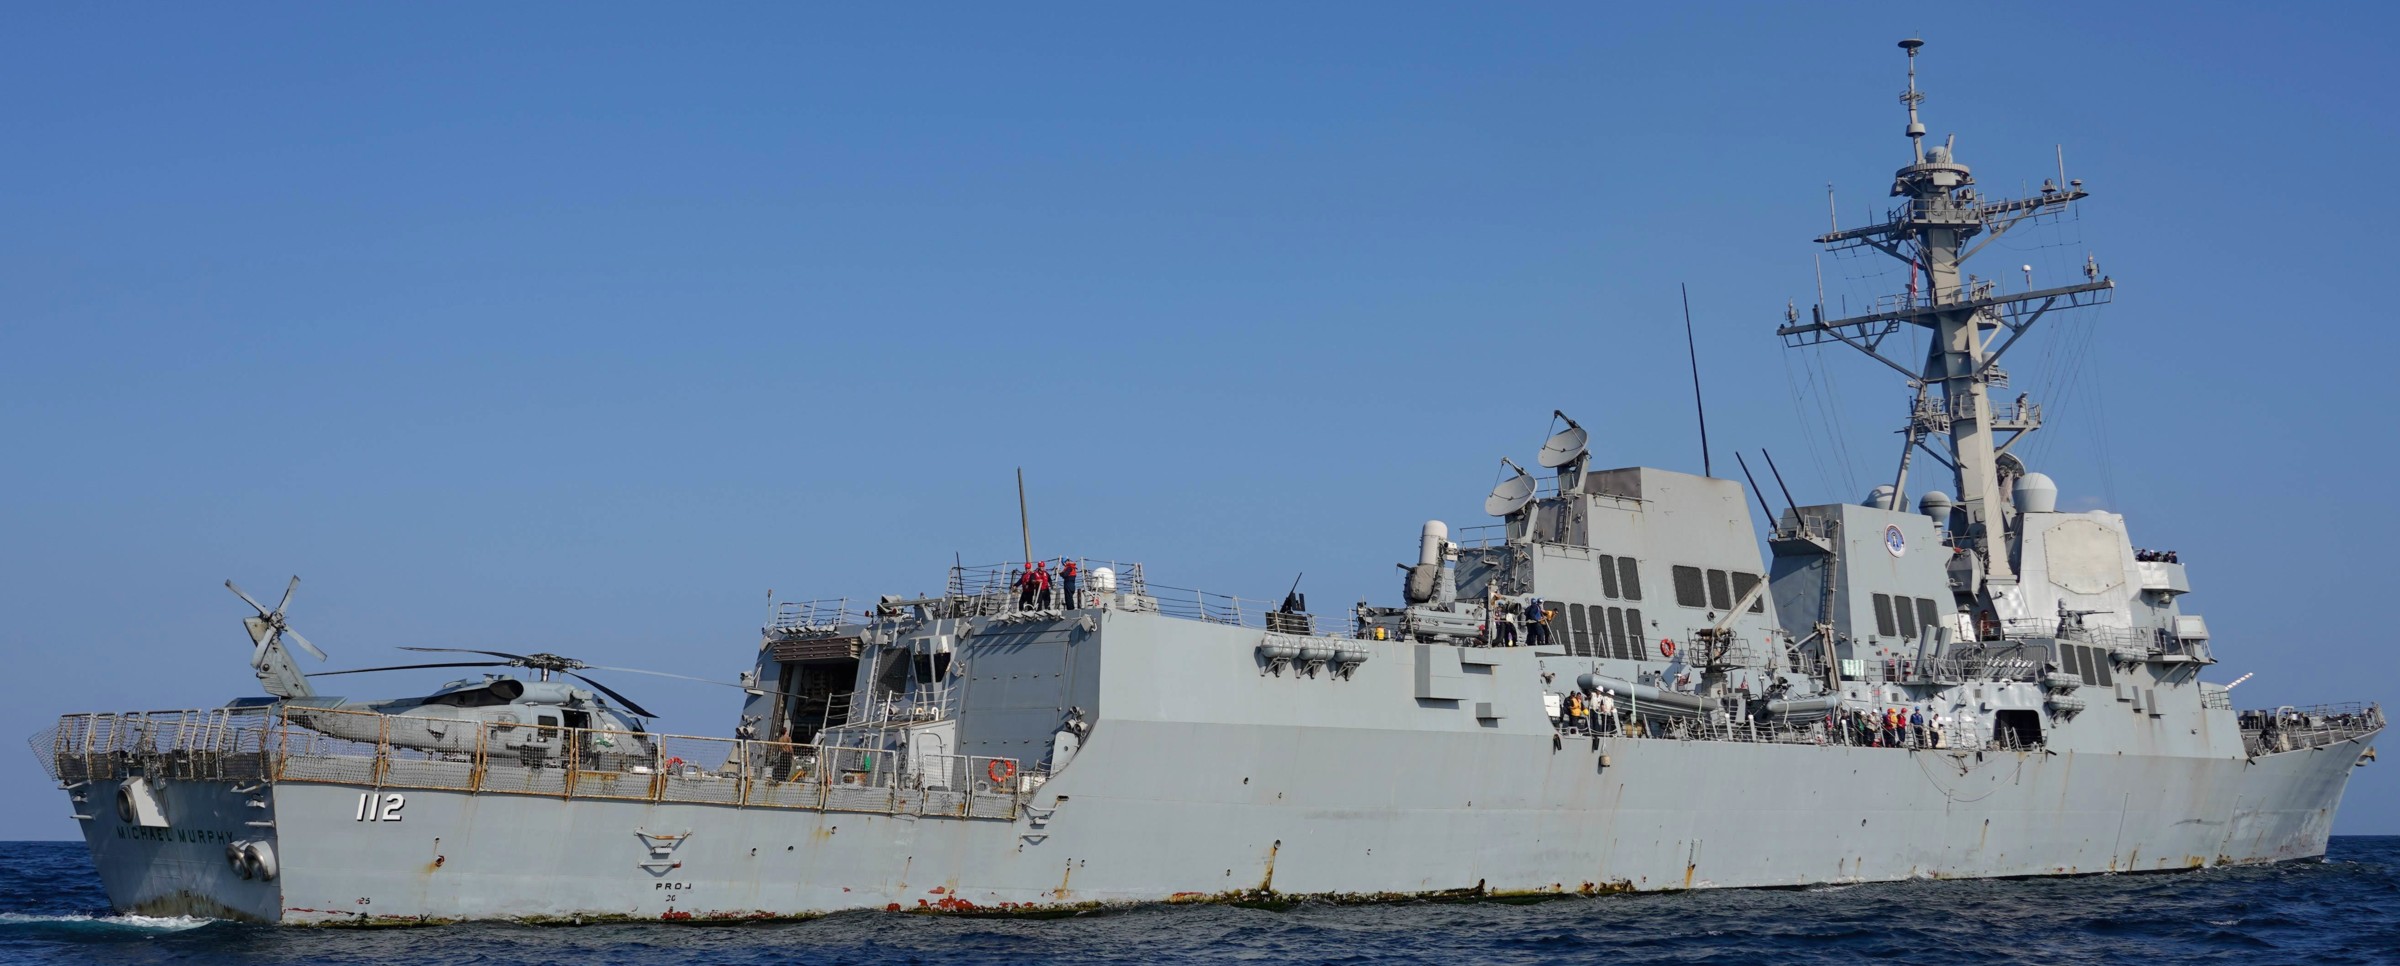 ddg-112 uss michael murphy arleigh burke class guided missile destroyer aegis us navy gulf of aden 79